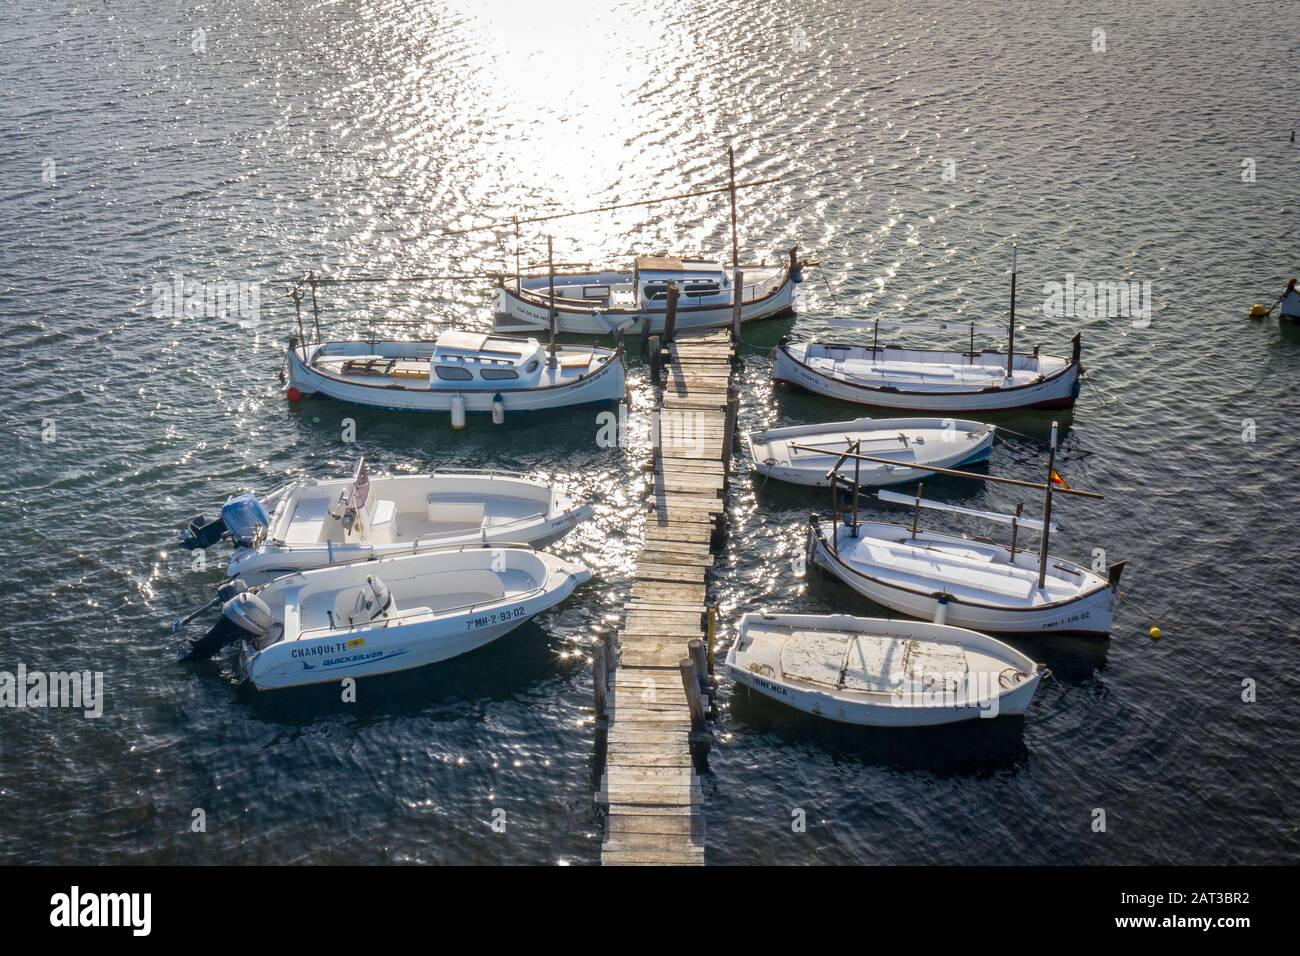 Spanish fishing boats moored in golden hour Stock Photo